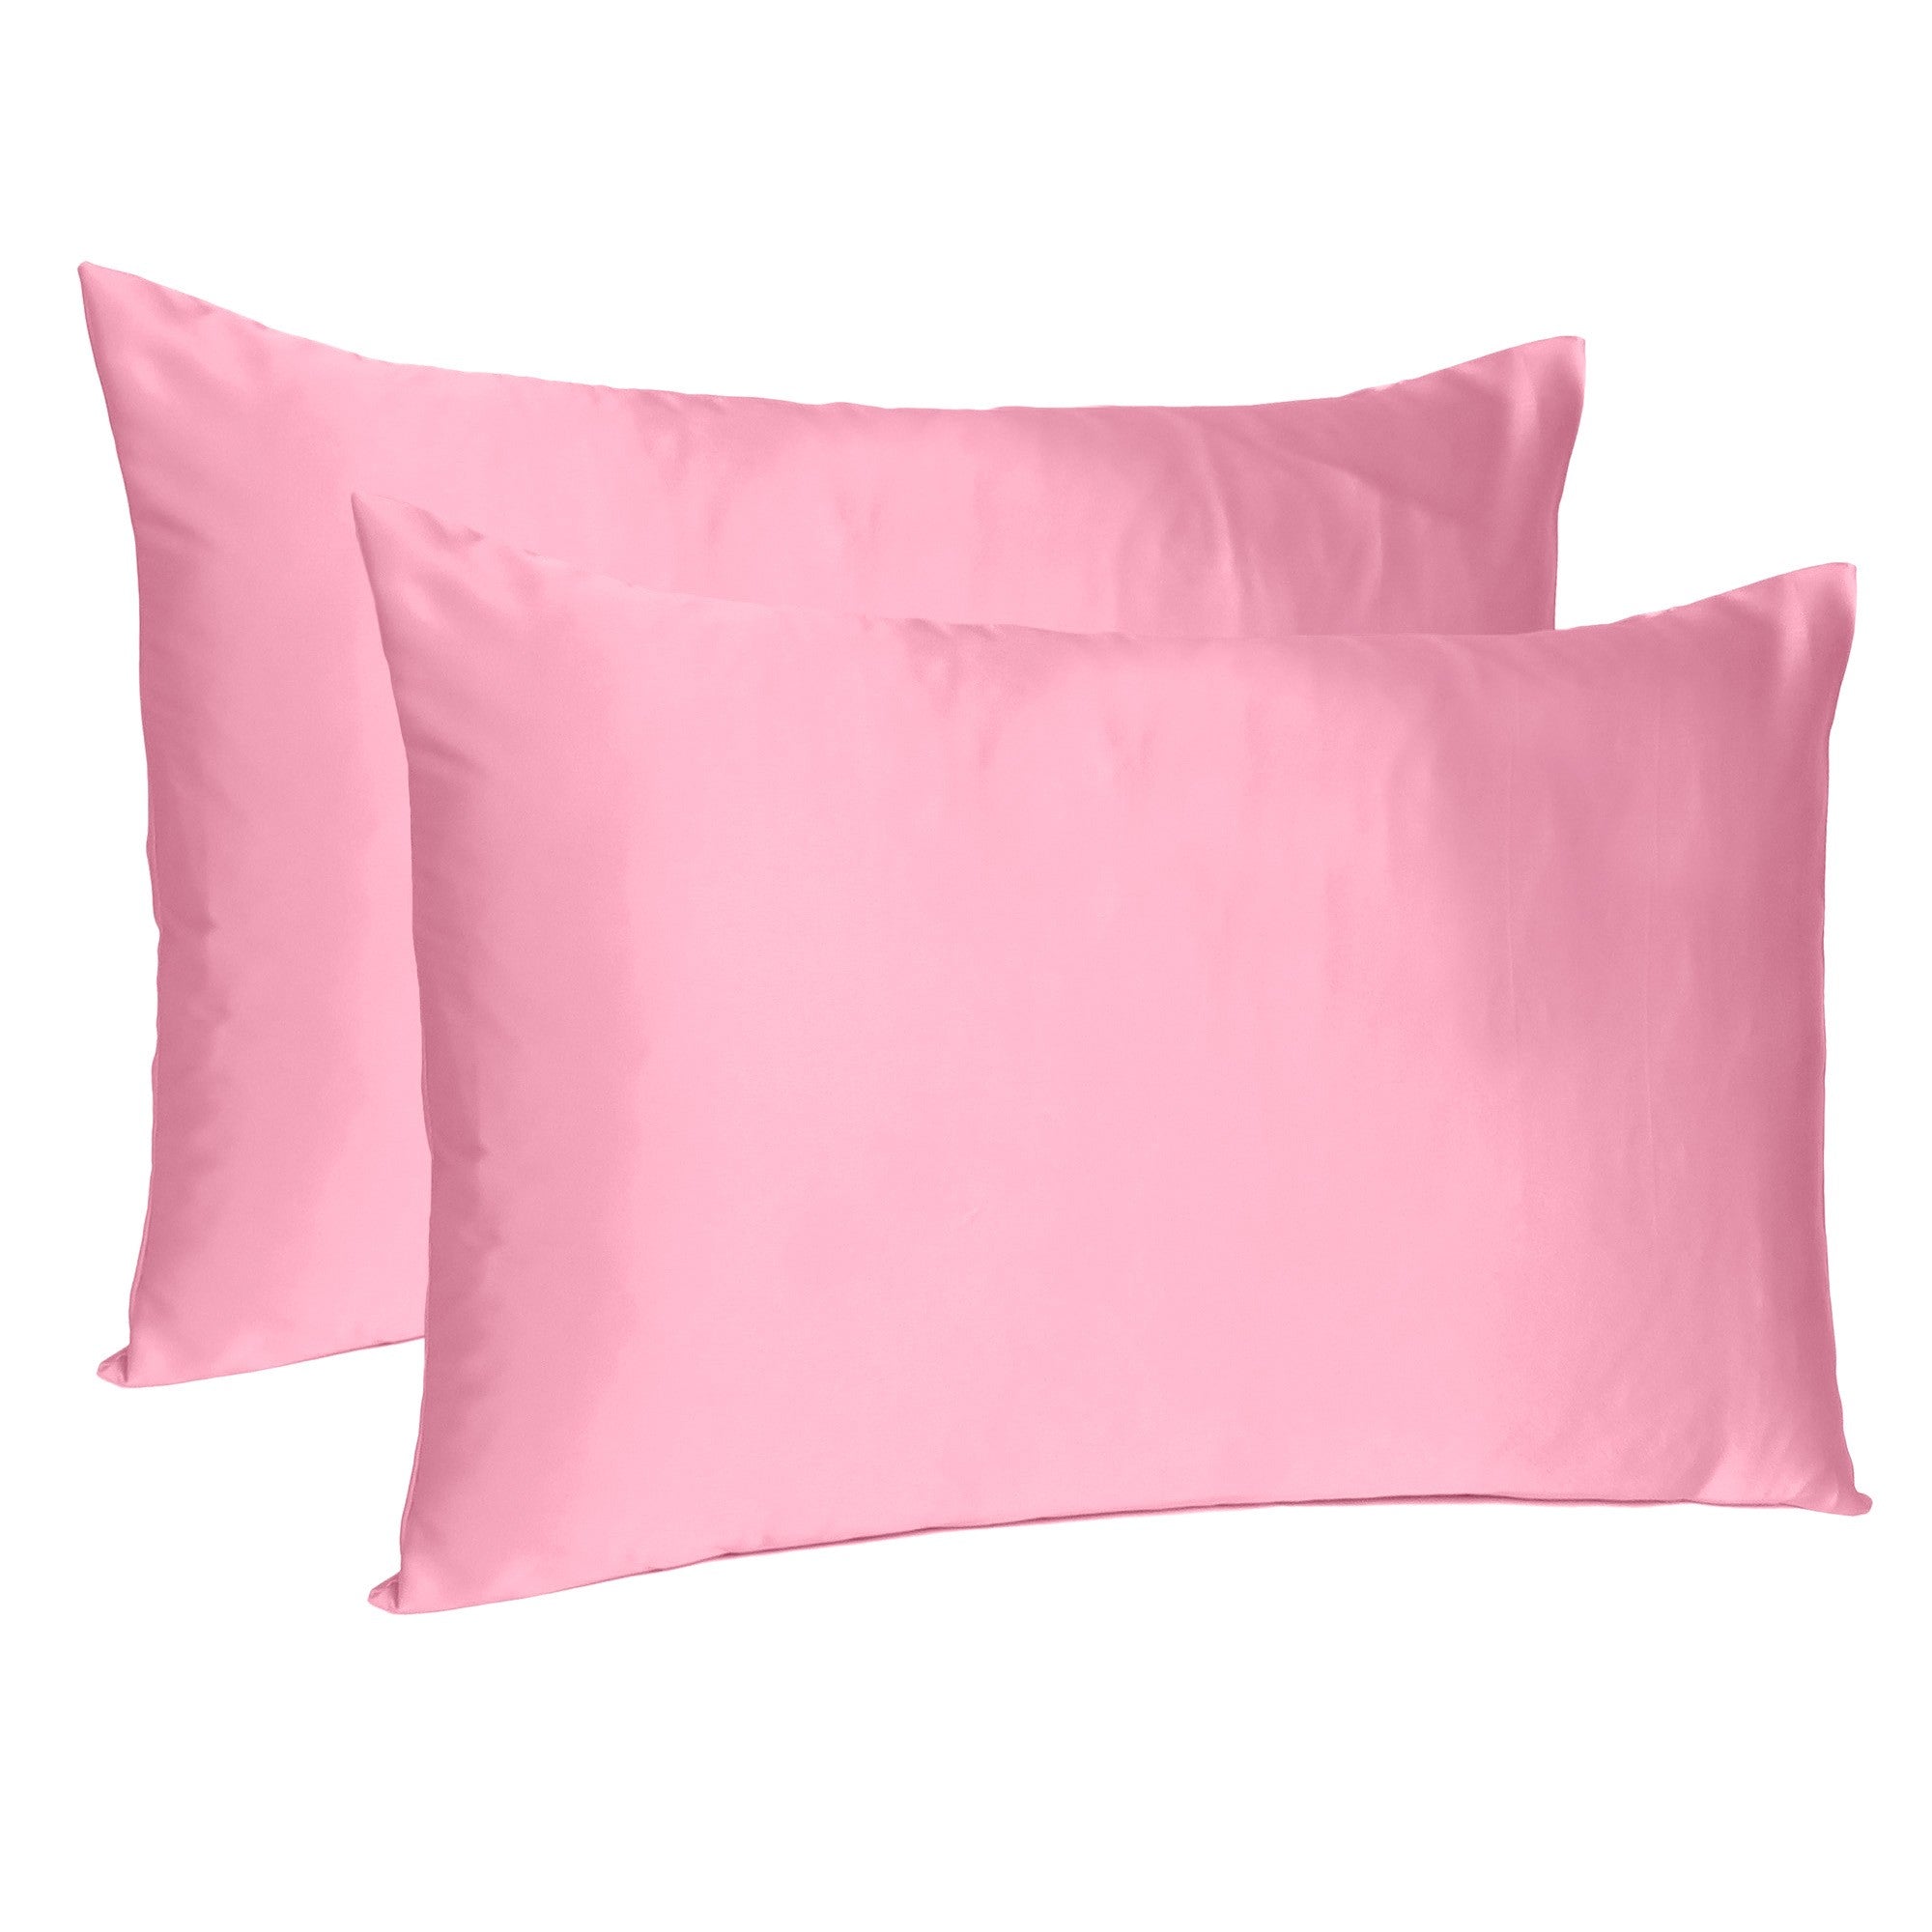 Pink-Rose-Dreamy-Set-Of-2-Silky-Satin-Queen-Pillowcases-Bed-Sheets